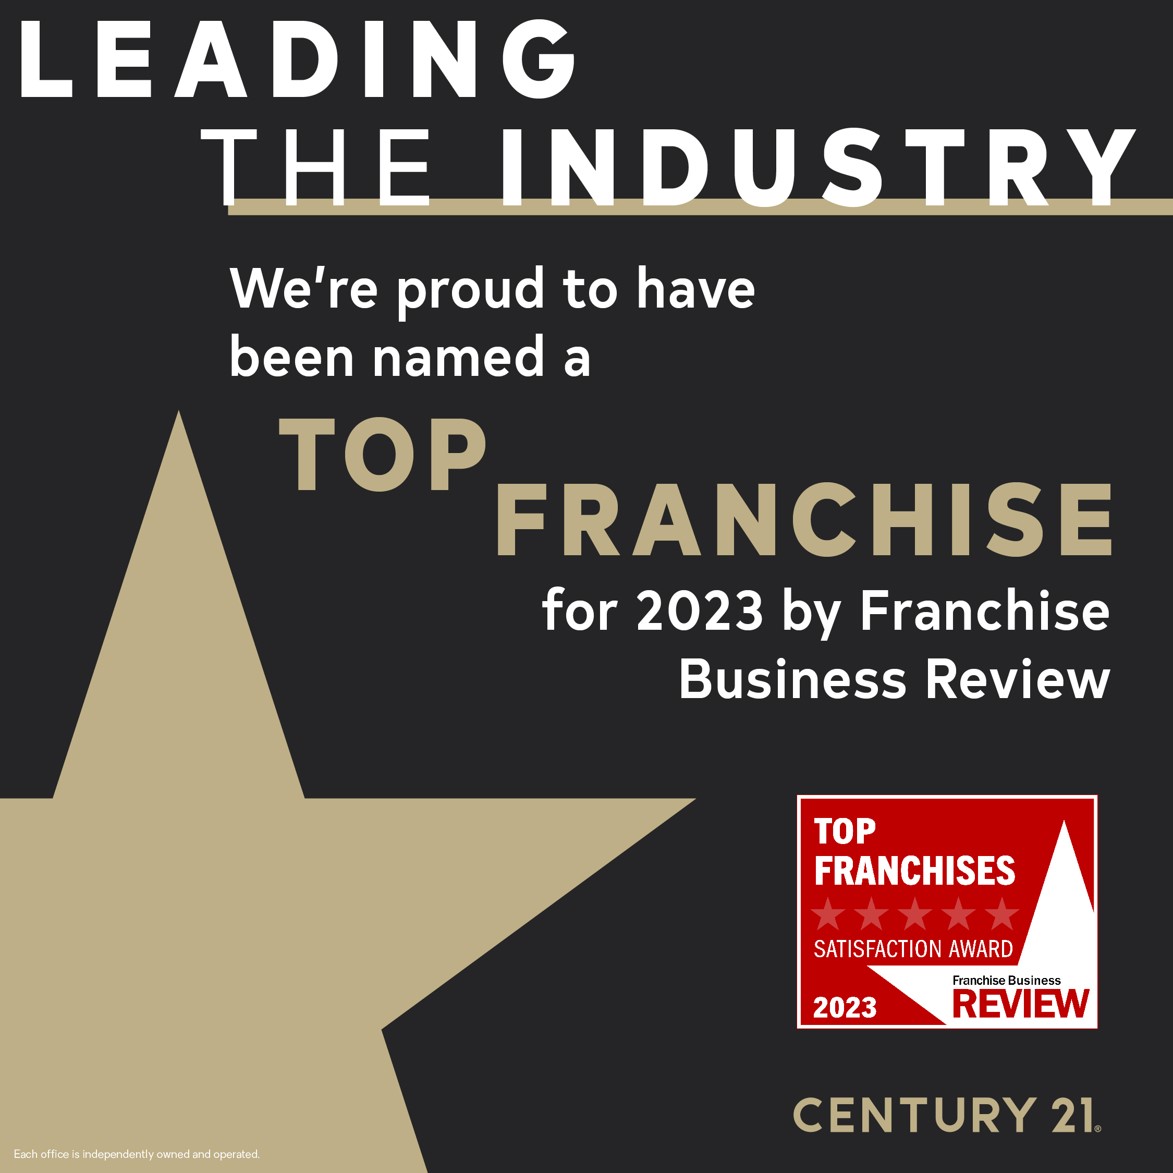 Top Franchise for 2023